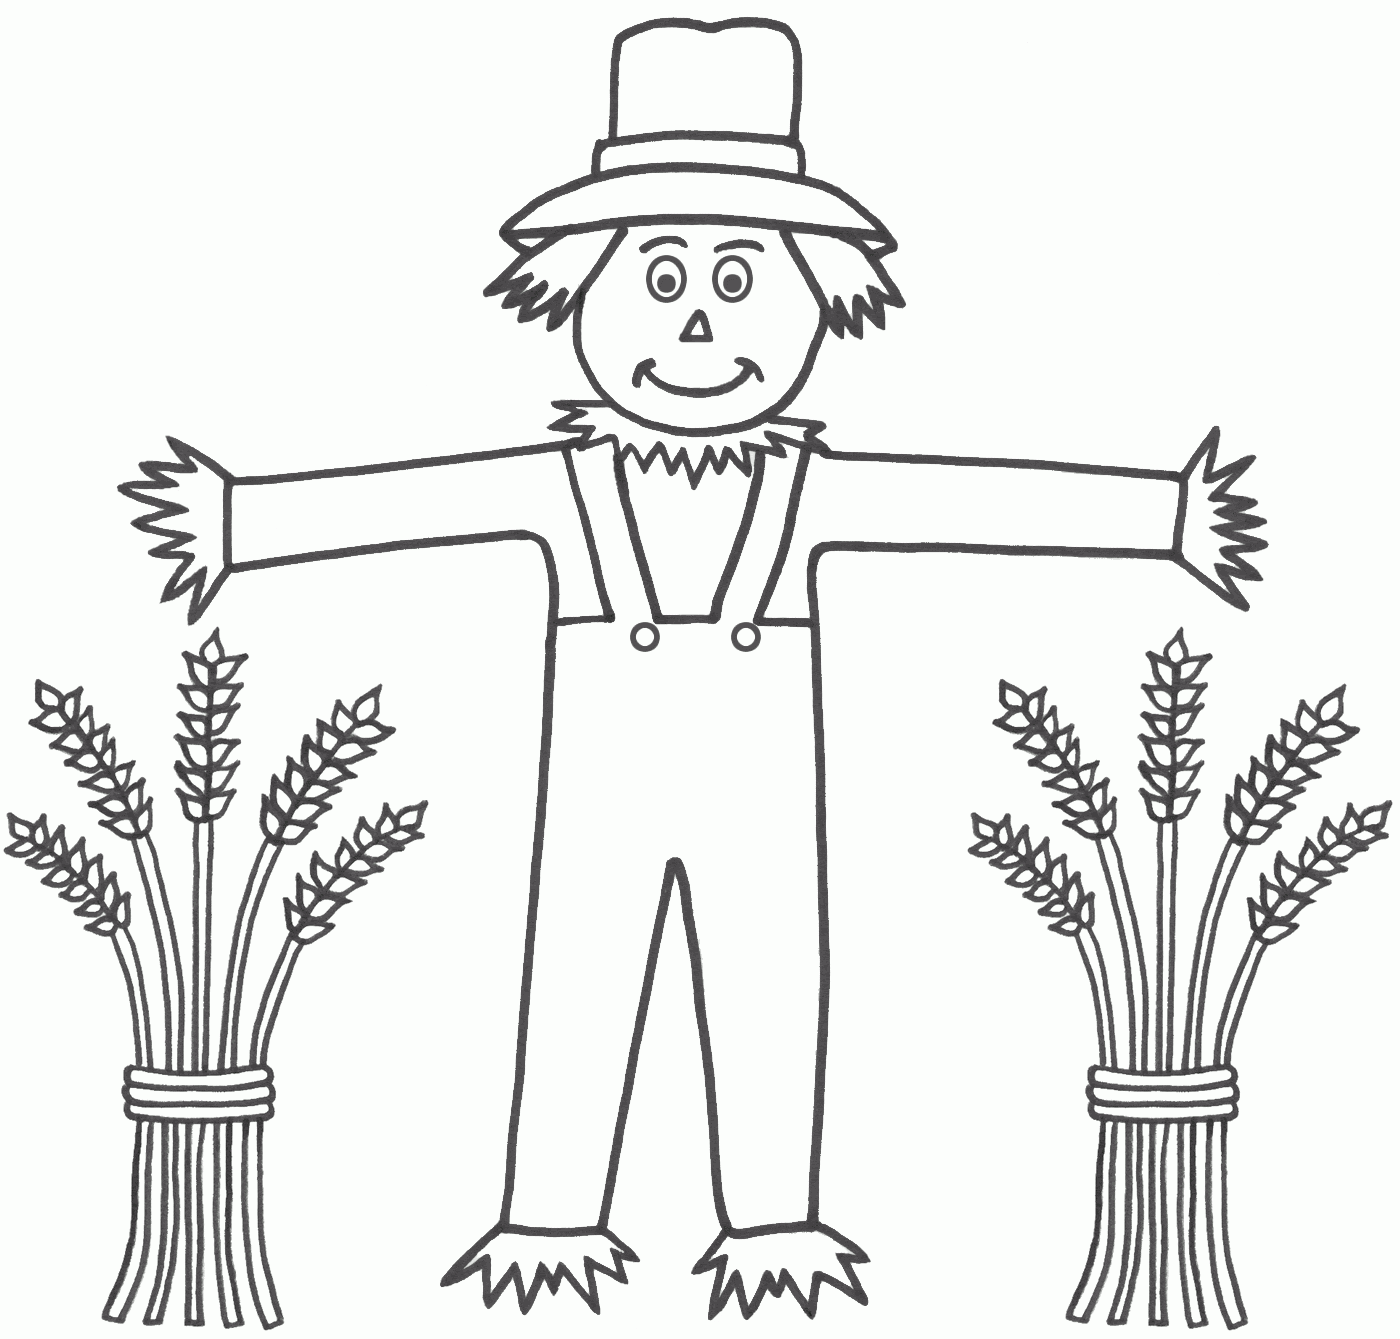 Essay Free Printable Scarecrow Coloring Pages For Kids - Widetheme